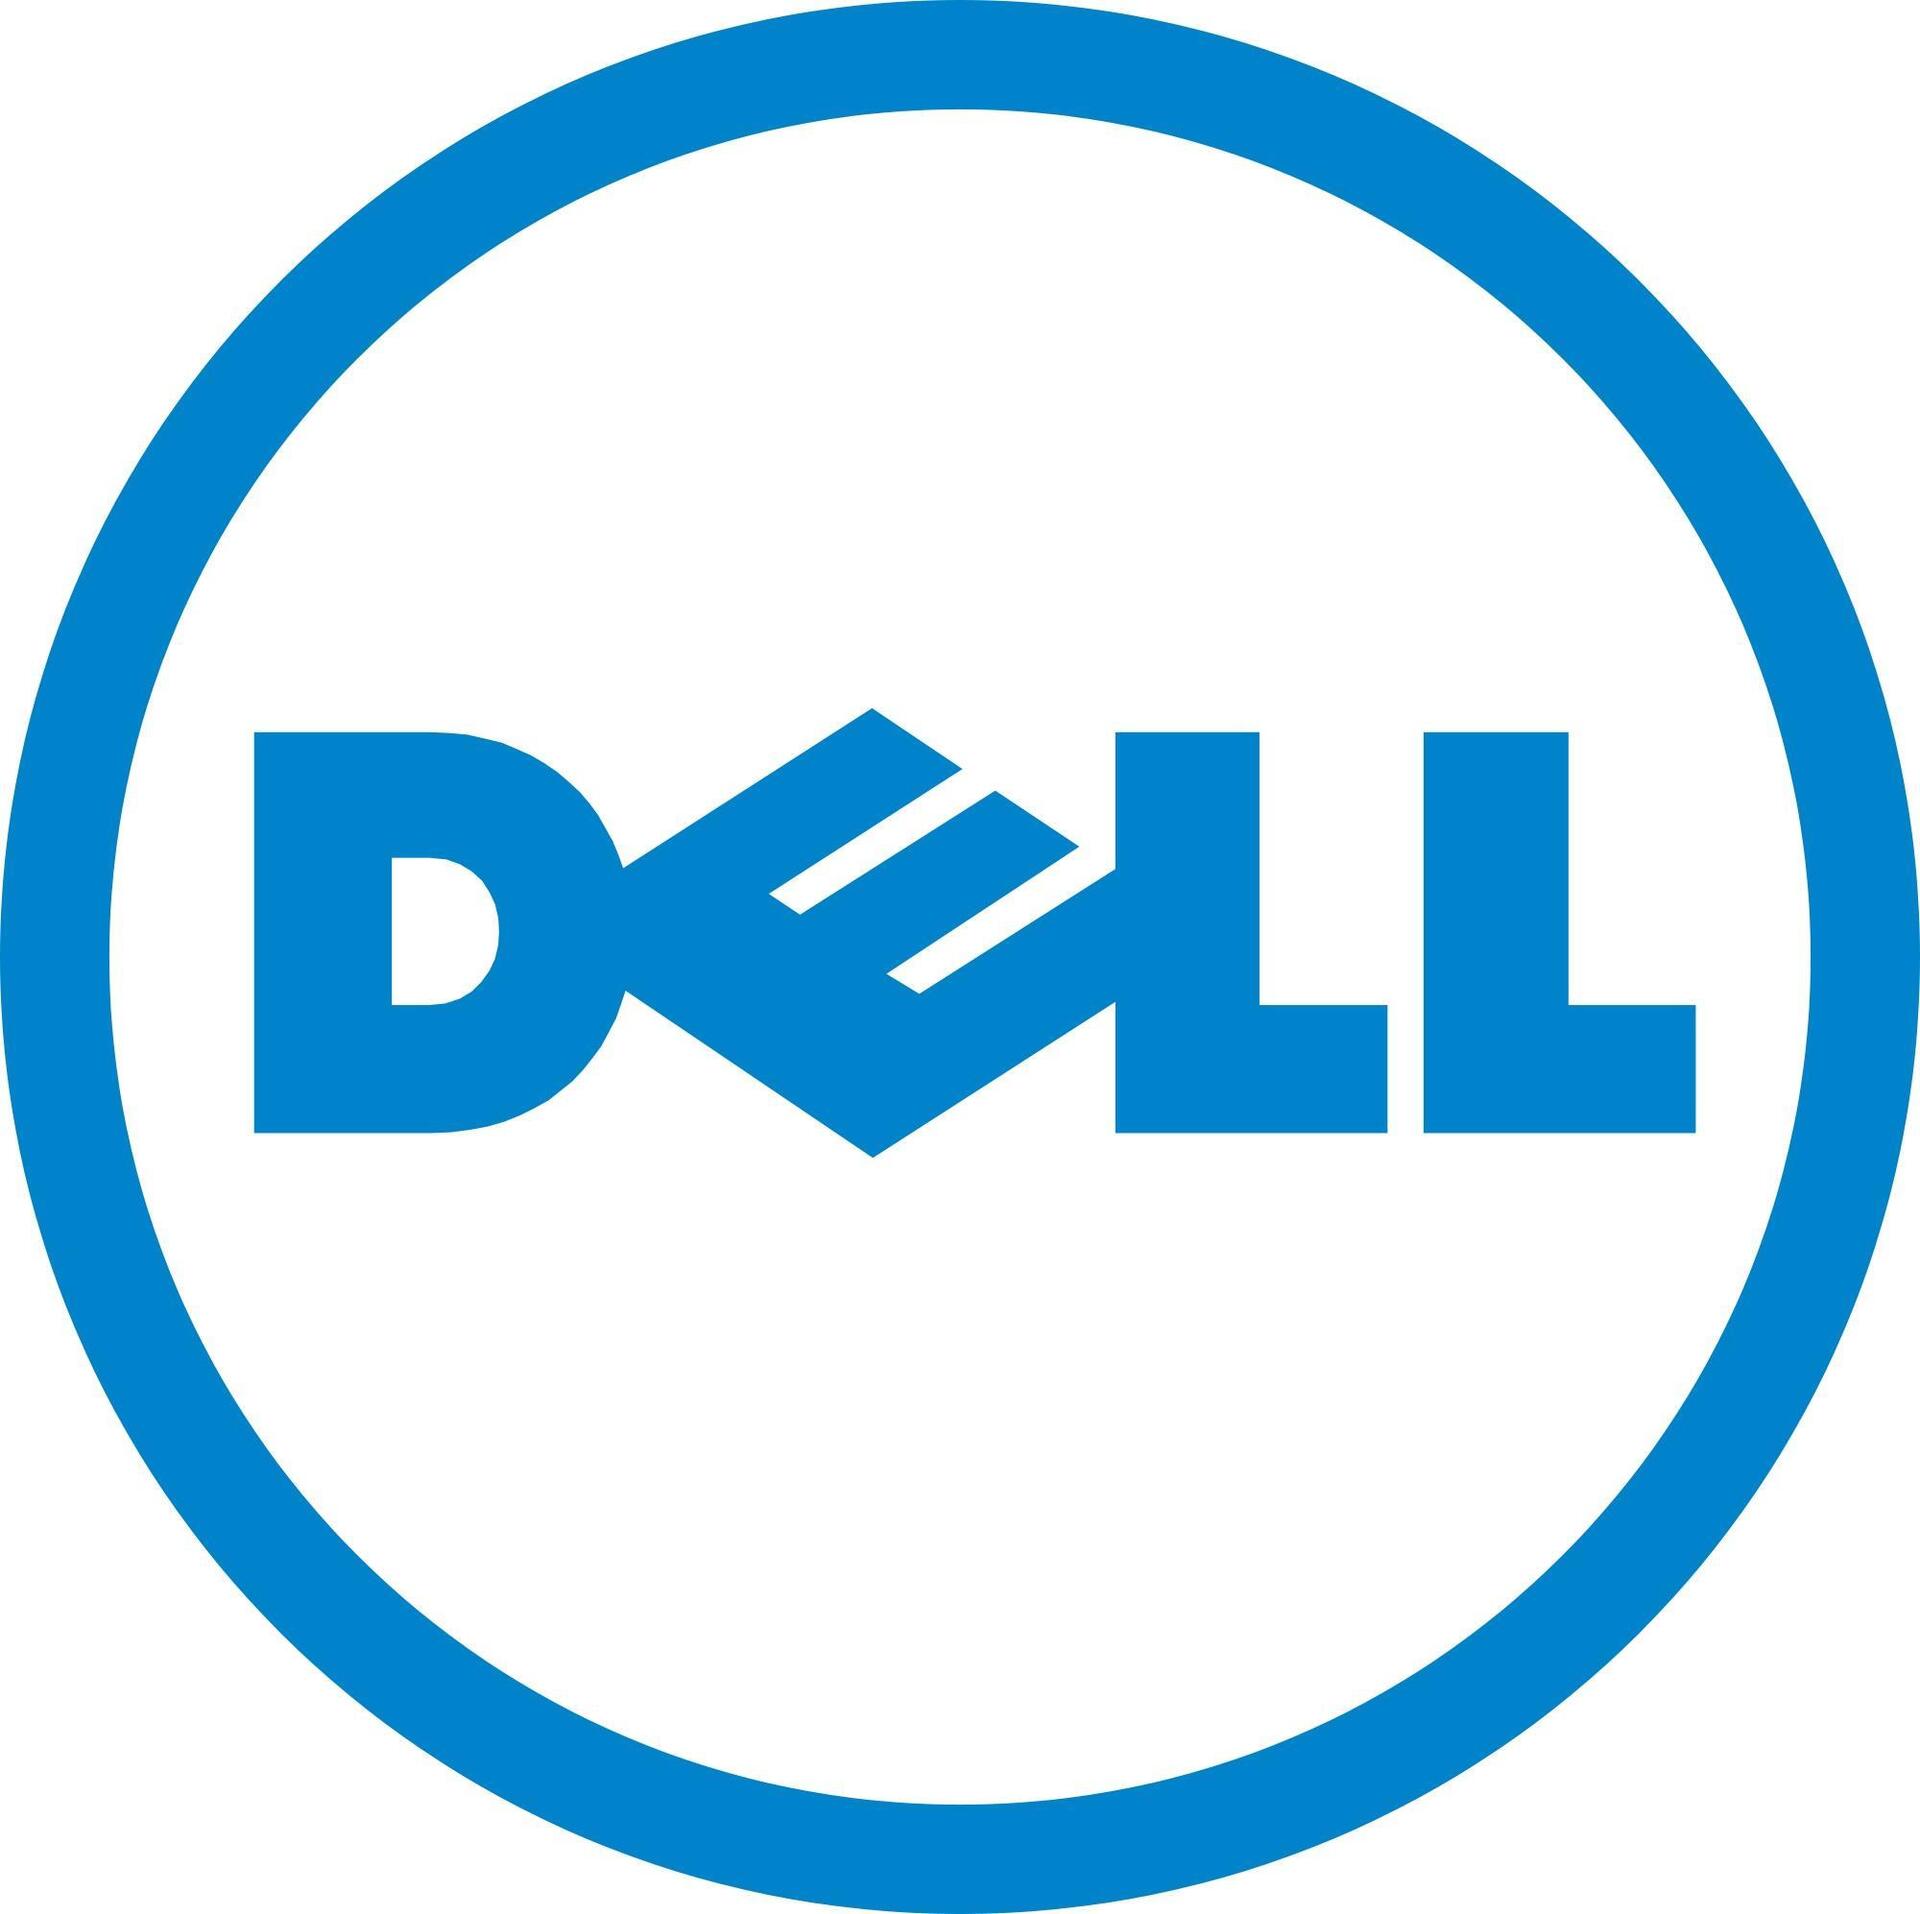 DELL 3 Year Gold Hardware Maintenance by Avocent for the Dell DMPU2016